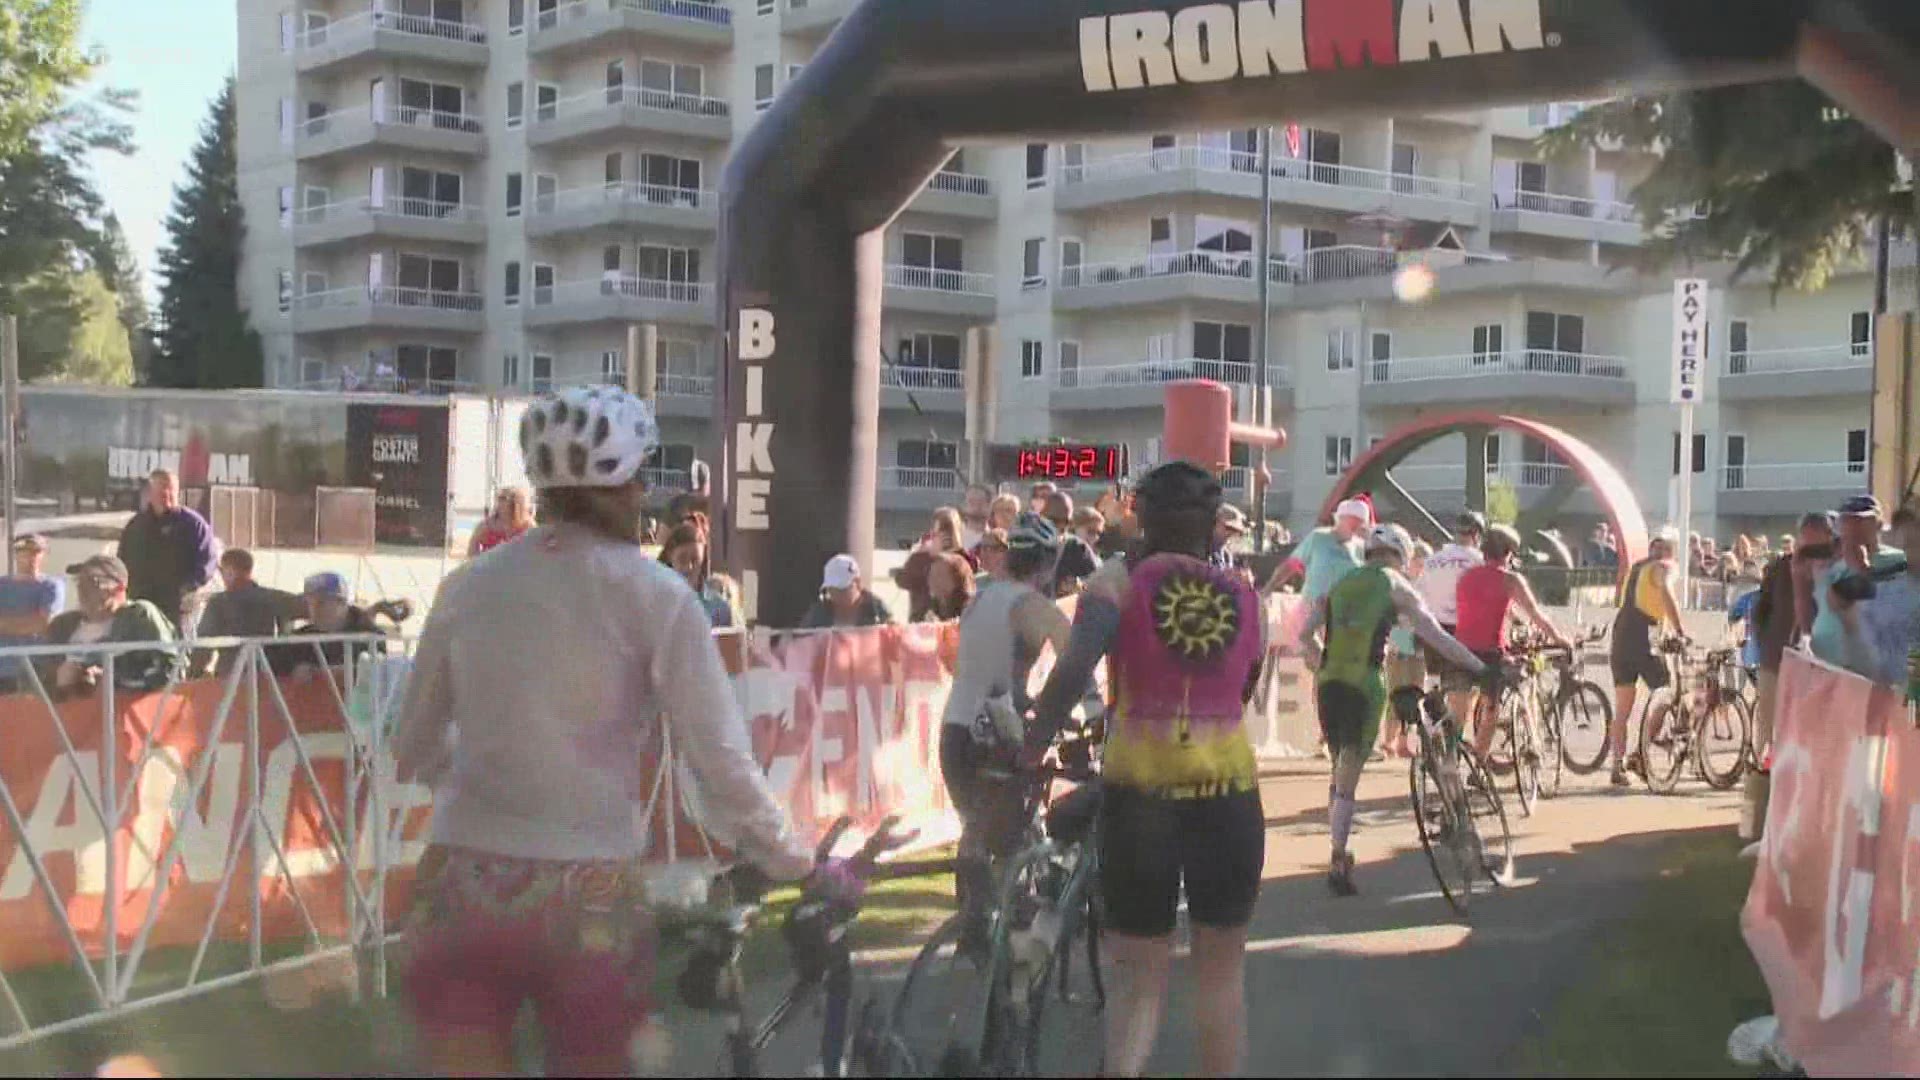 Full Ironman is returning to Coeur d'Alene and volunteers are needed